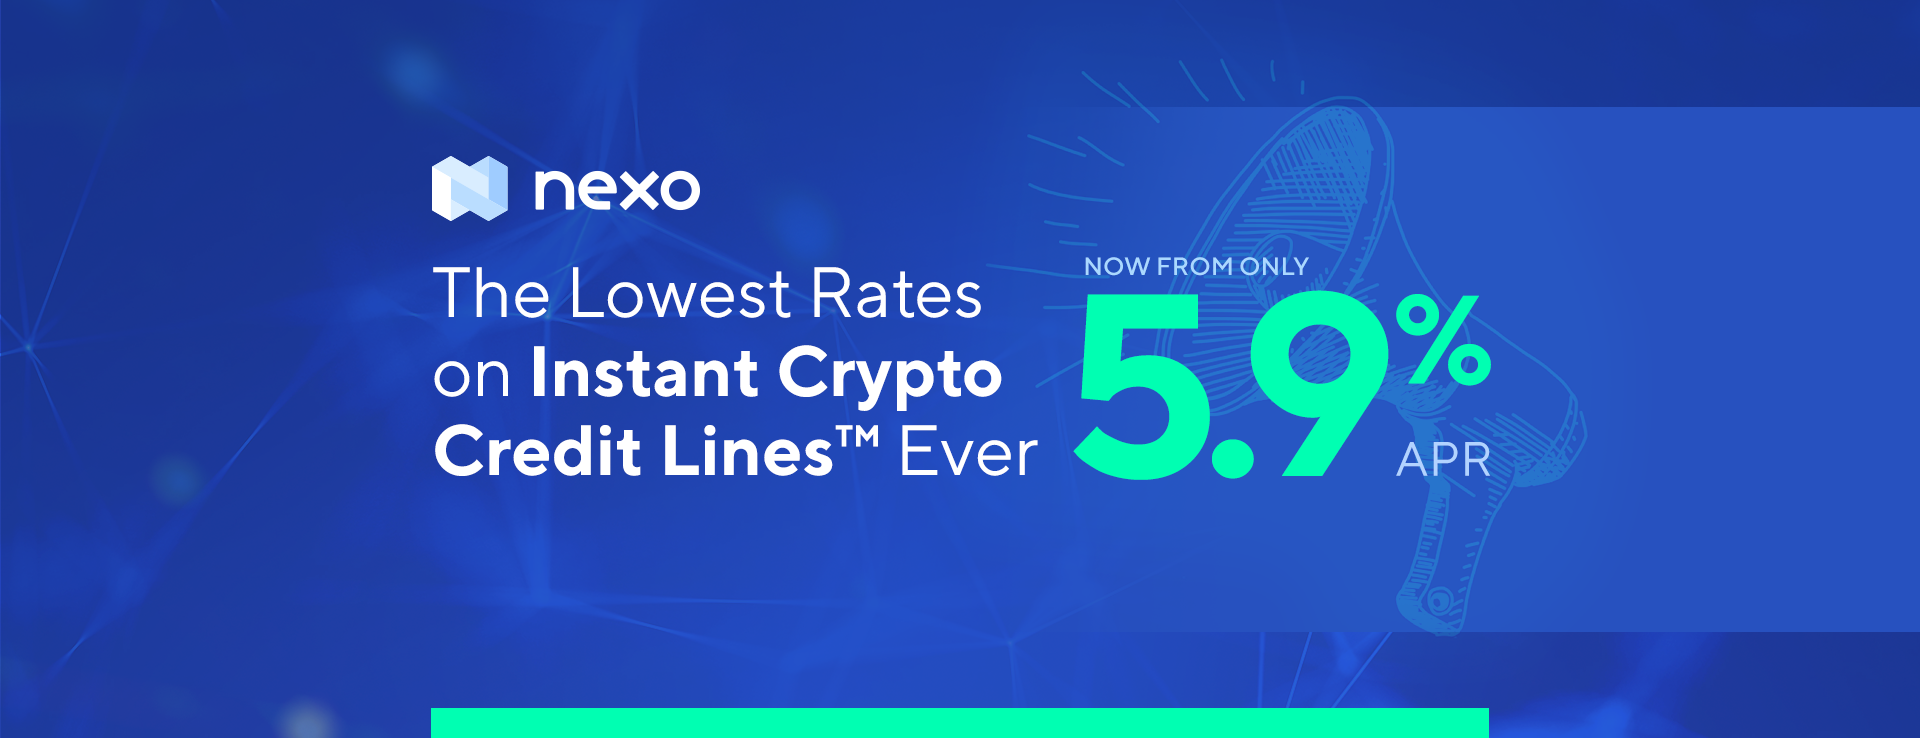 Nexo Cuts Borrowing Rates to 5.9% APR After Securing Cost-Efficient Institutional Financing